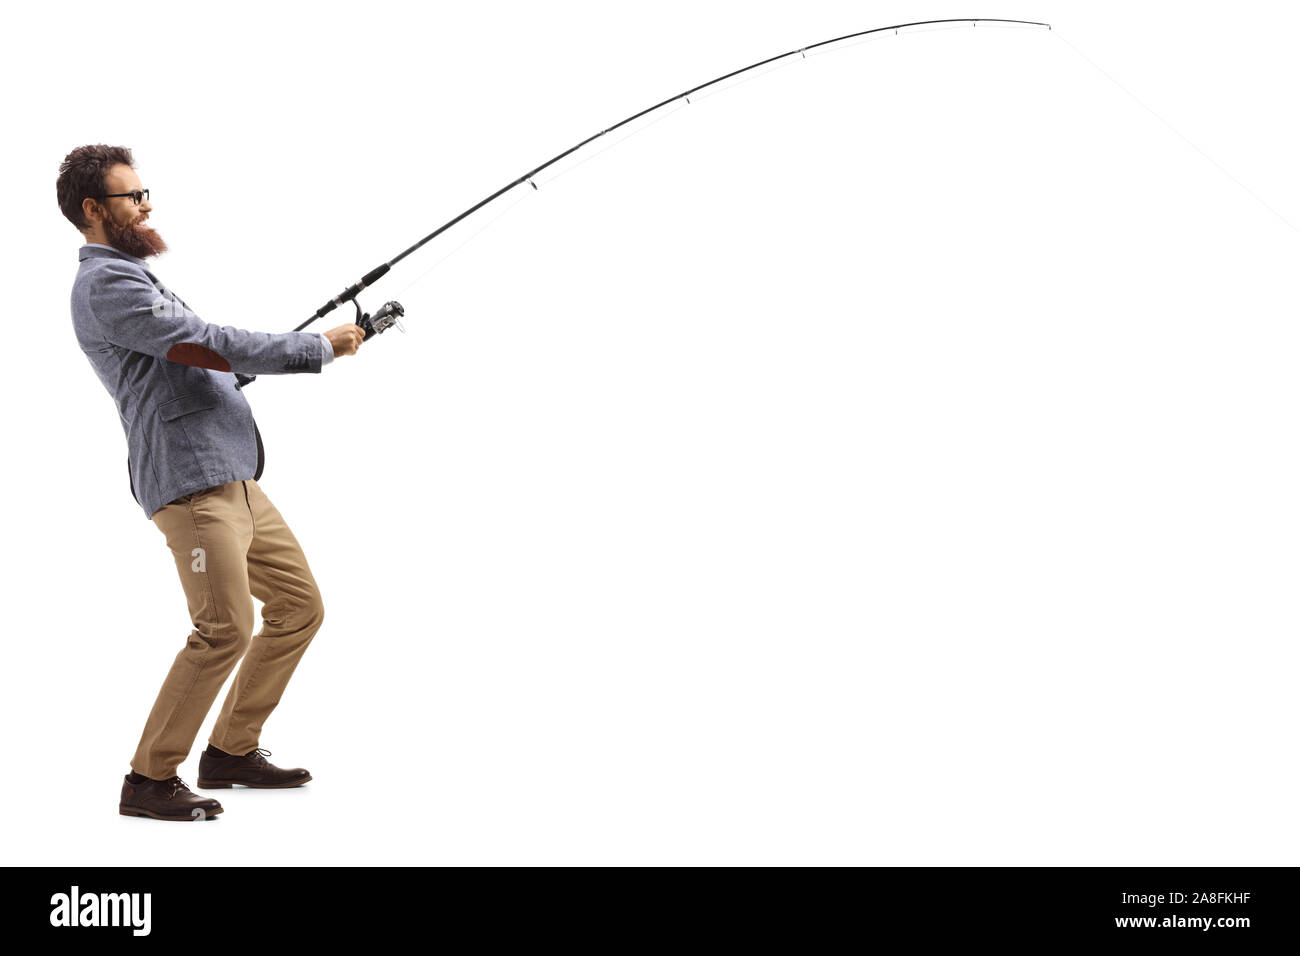 Full length profile shot of a casual man pulling a fishing rod